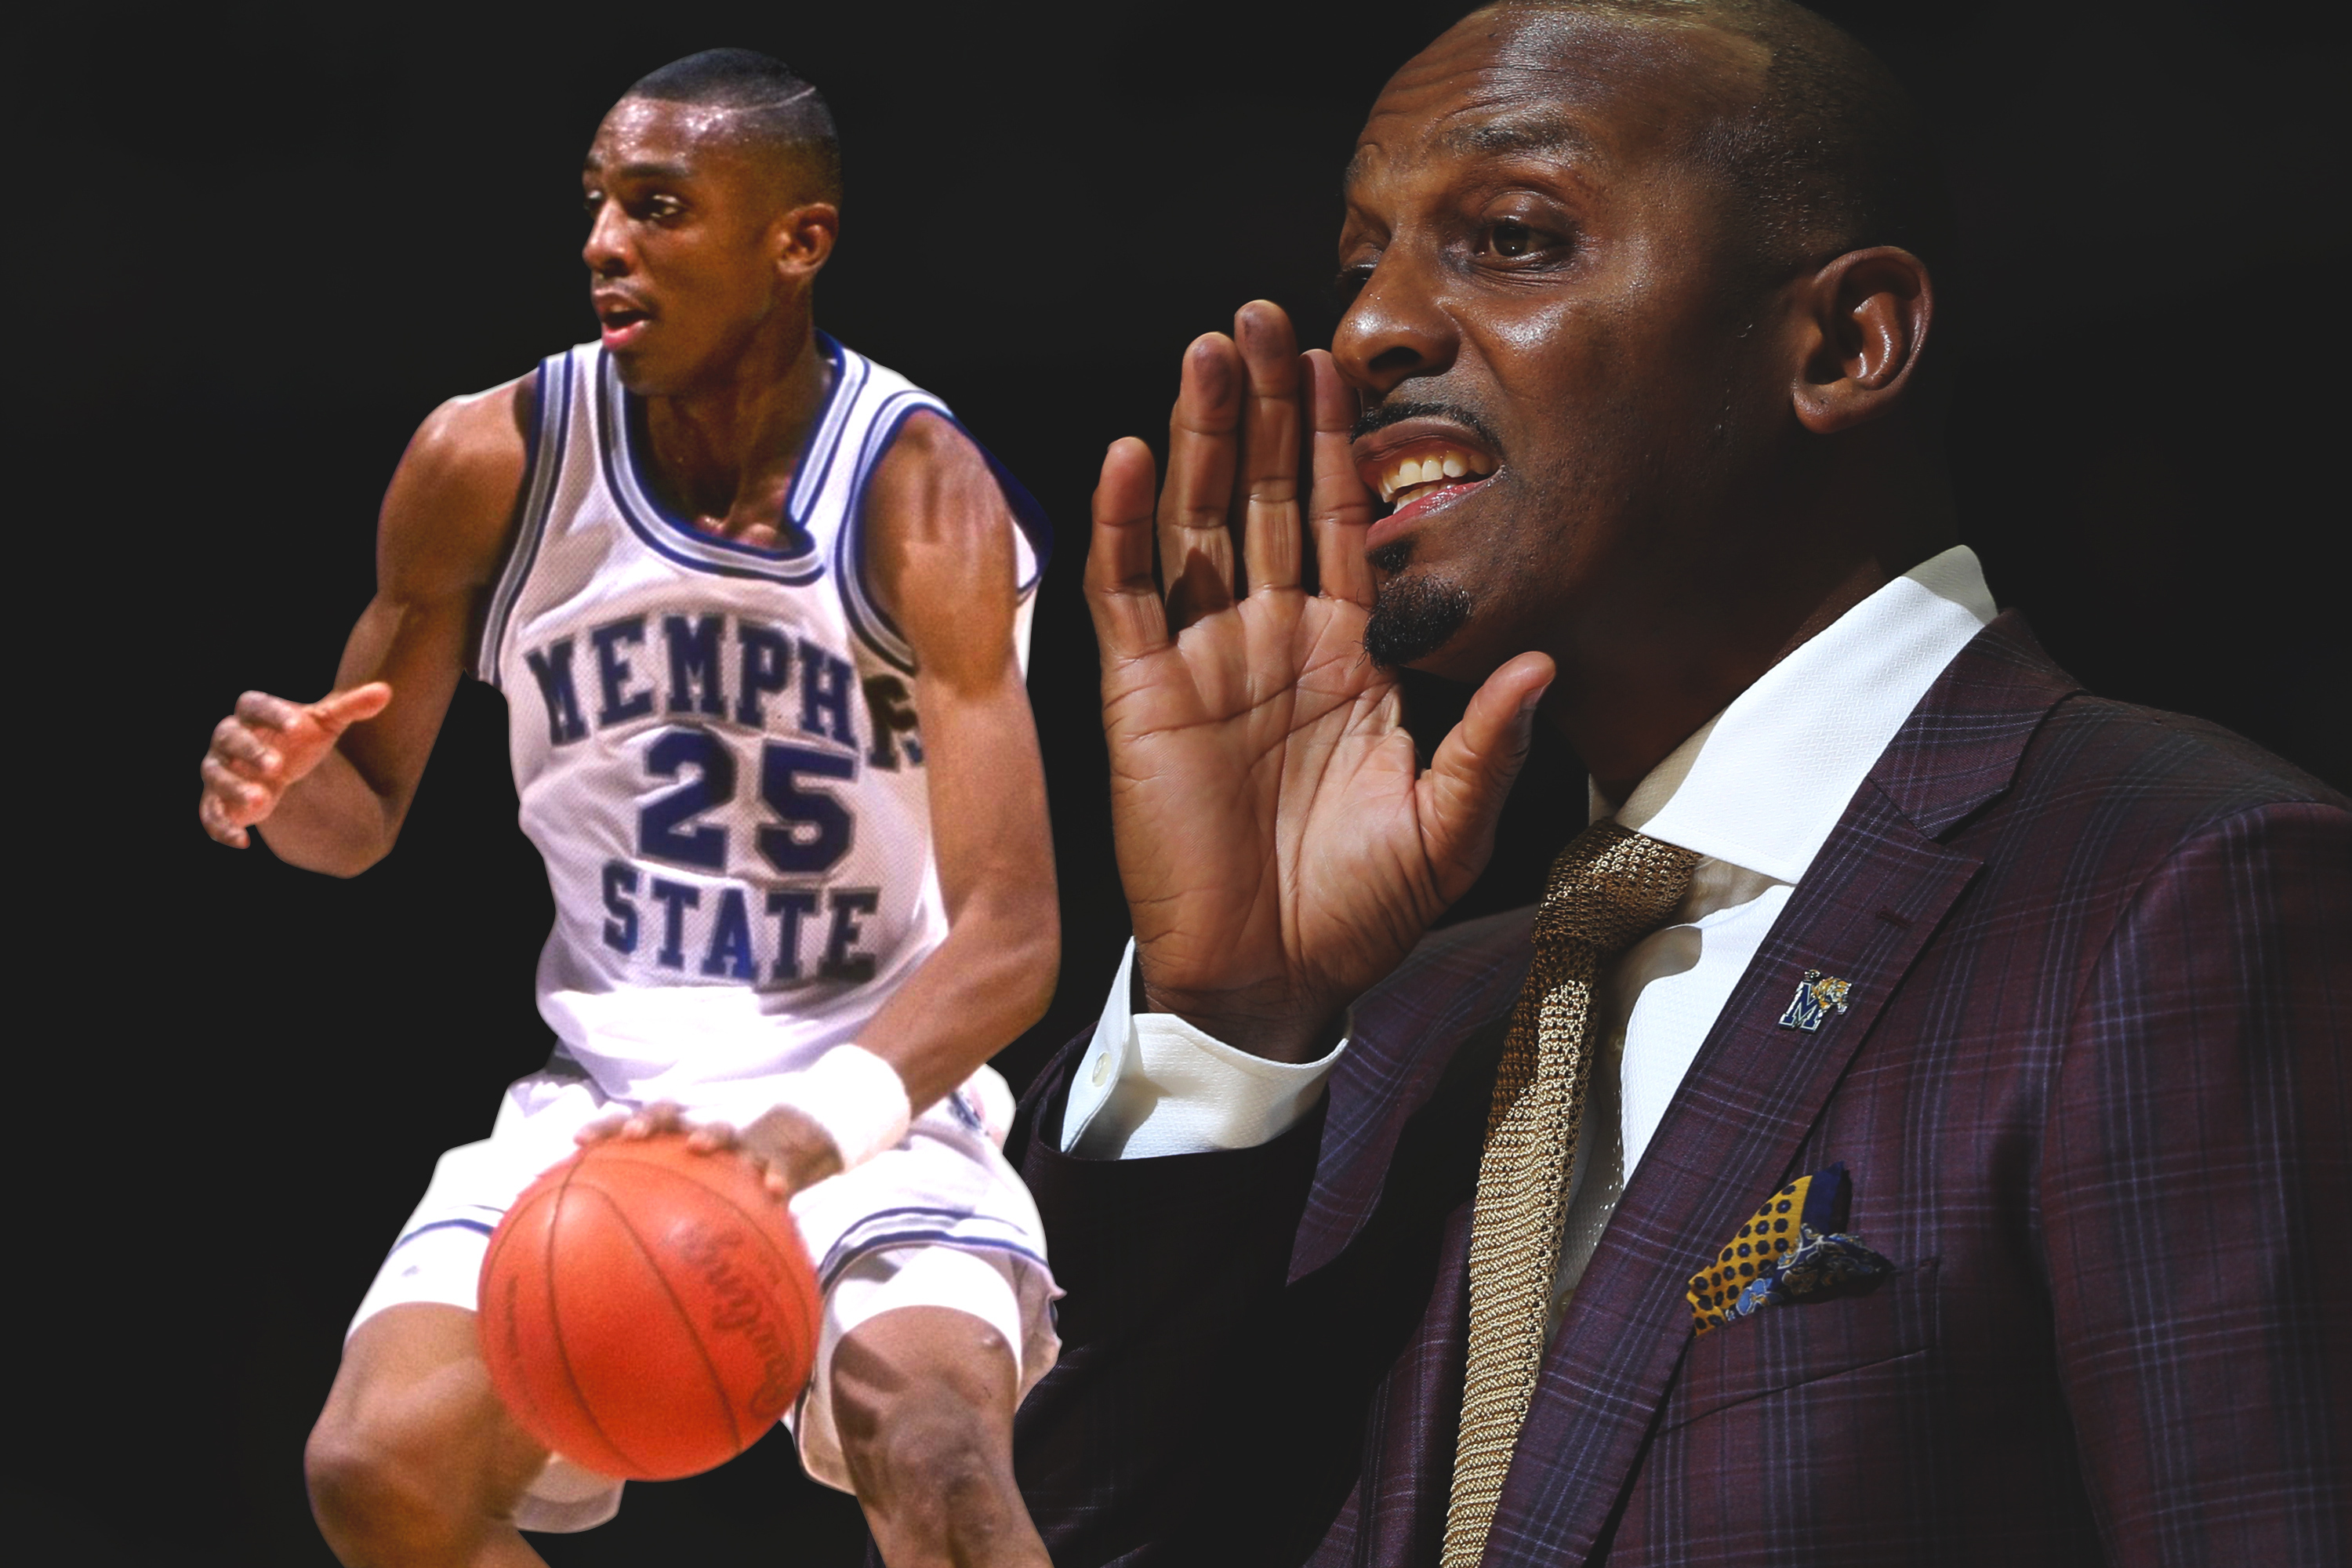 Shaq explains why Penny Hardaway is the player he would love to go